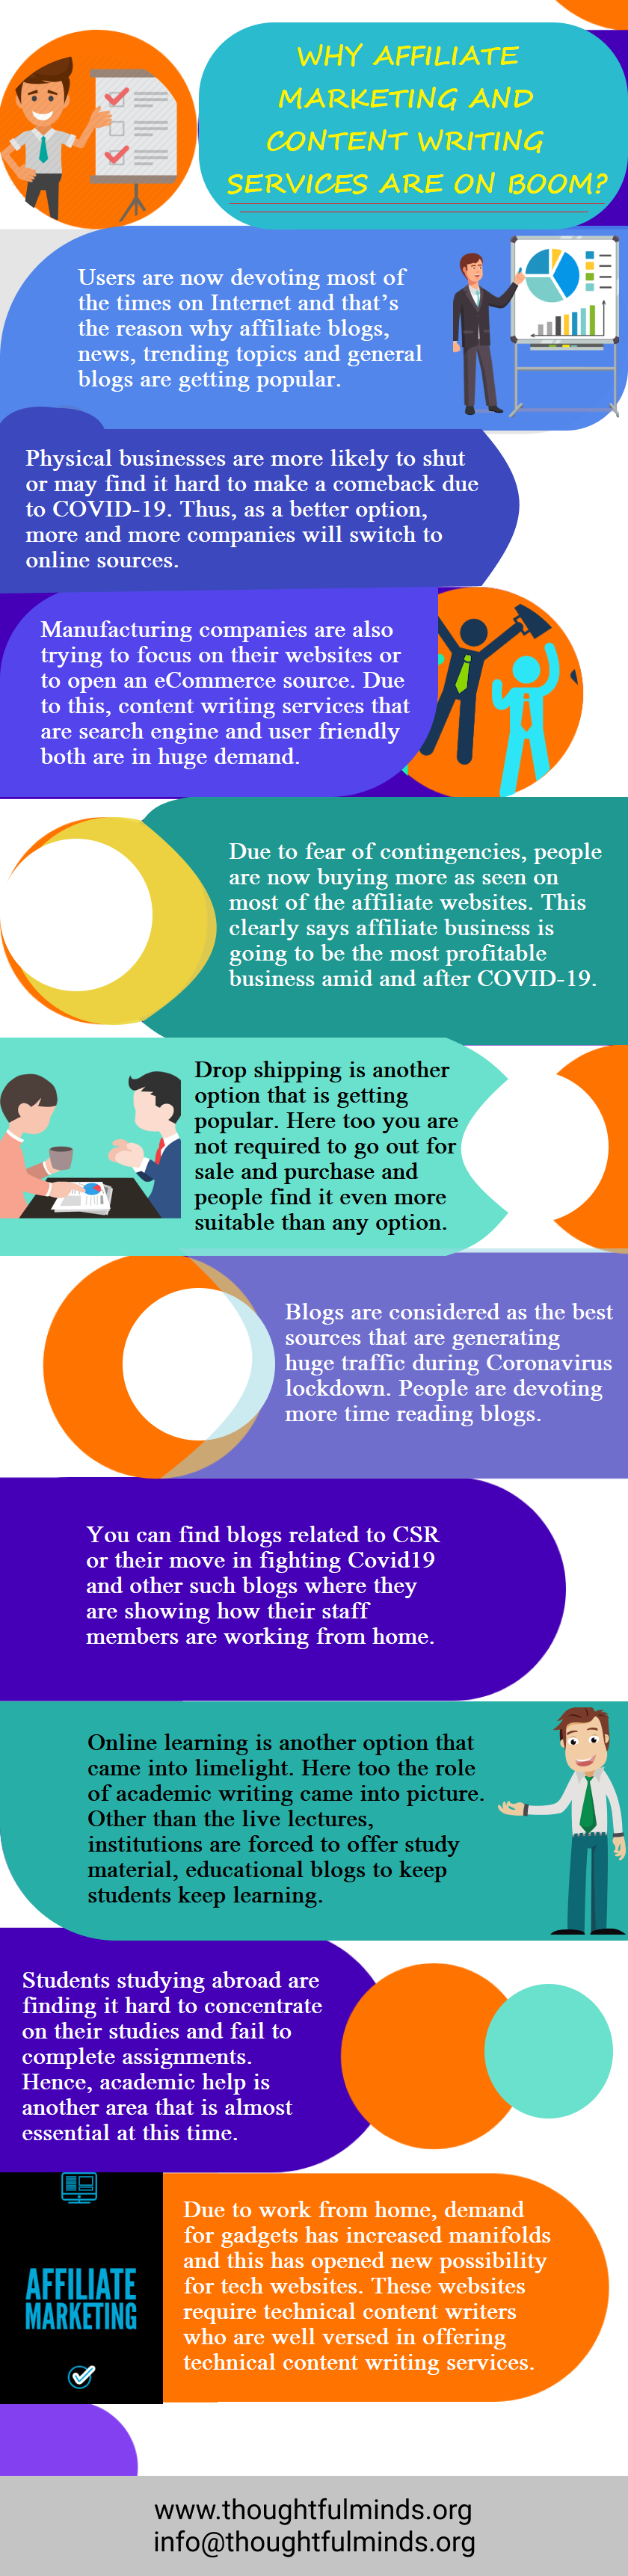 Infographic On Why Affiliate Marketing And Content Writing Services Are On Boom - ThoughtfulMinds